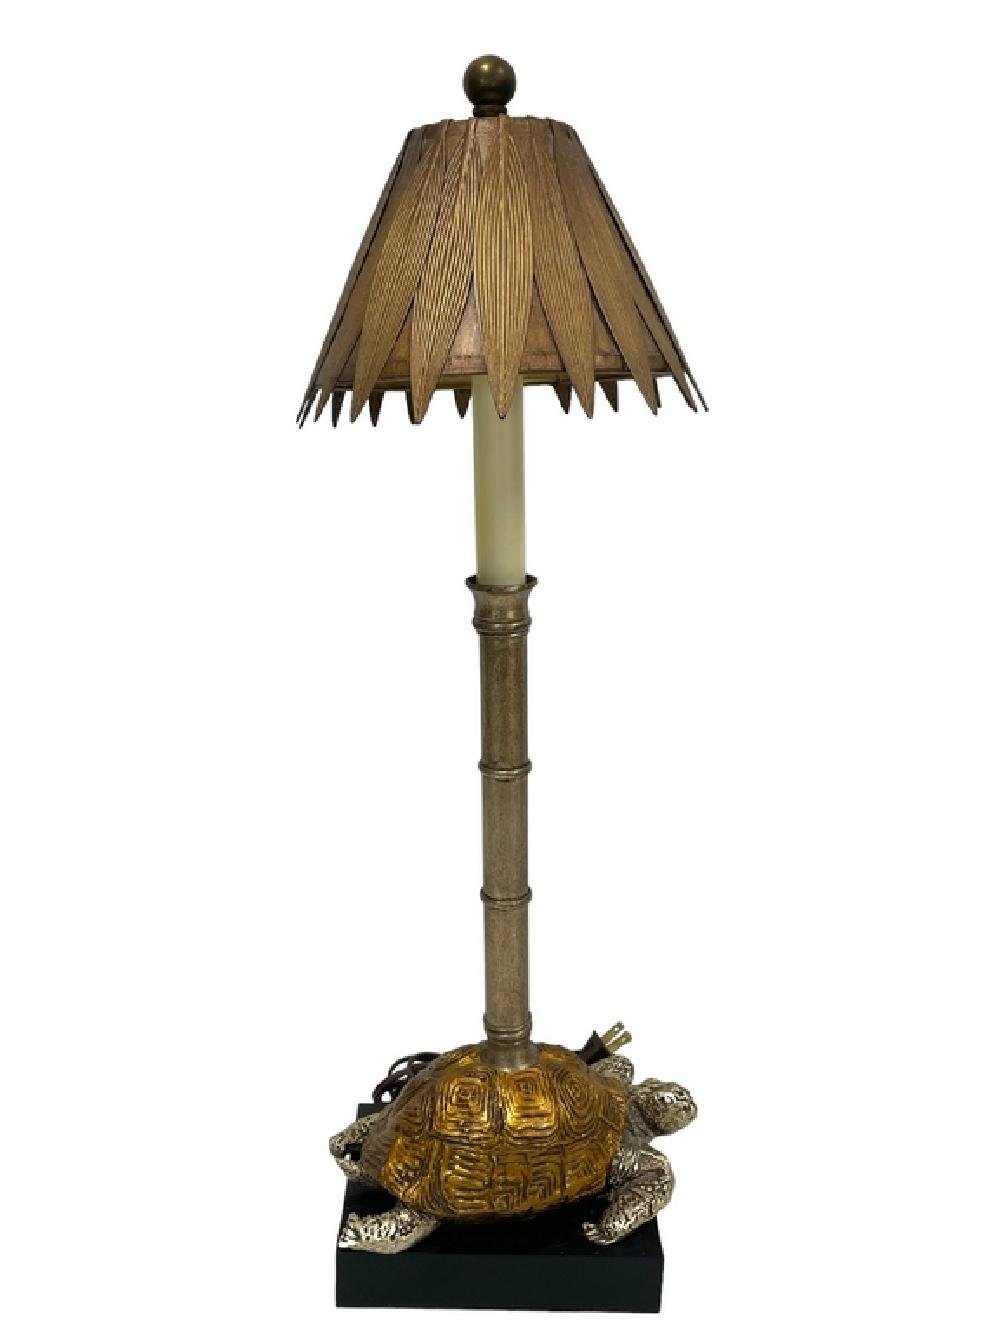 Image of Lamp with Tortoise Motif Base and Bamboo stem surmounted by a Palm Stylized Shade